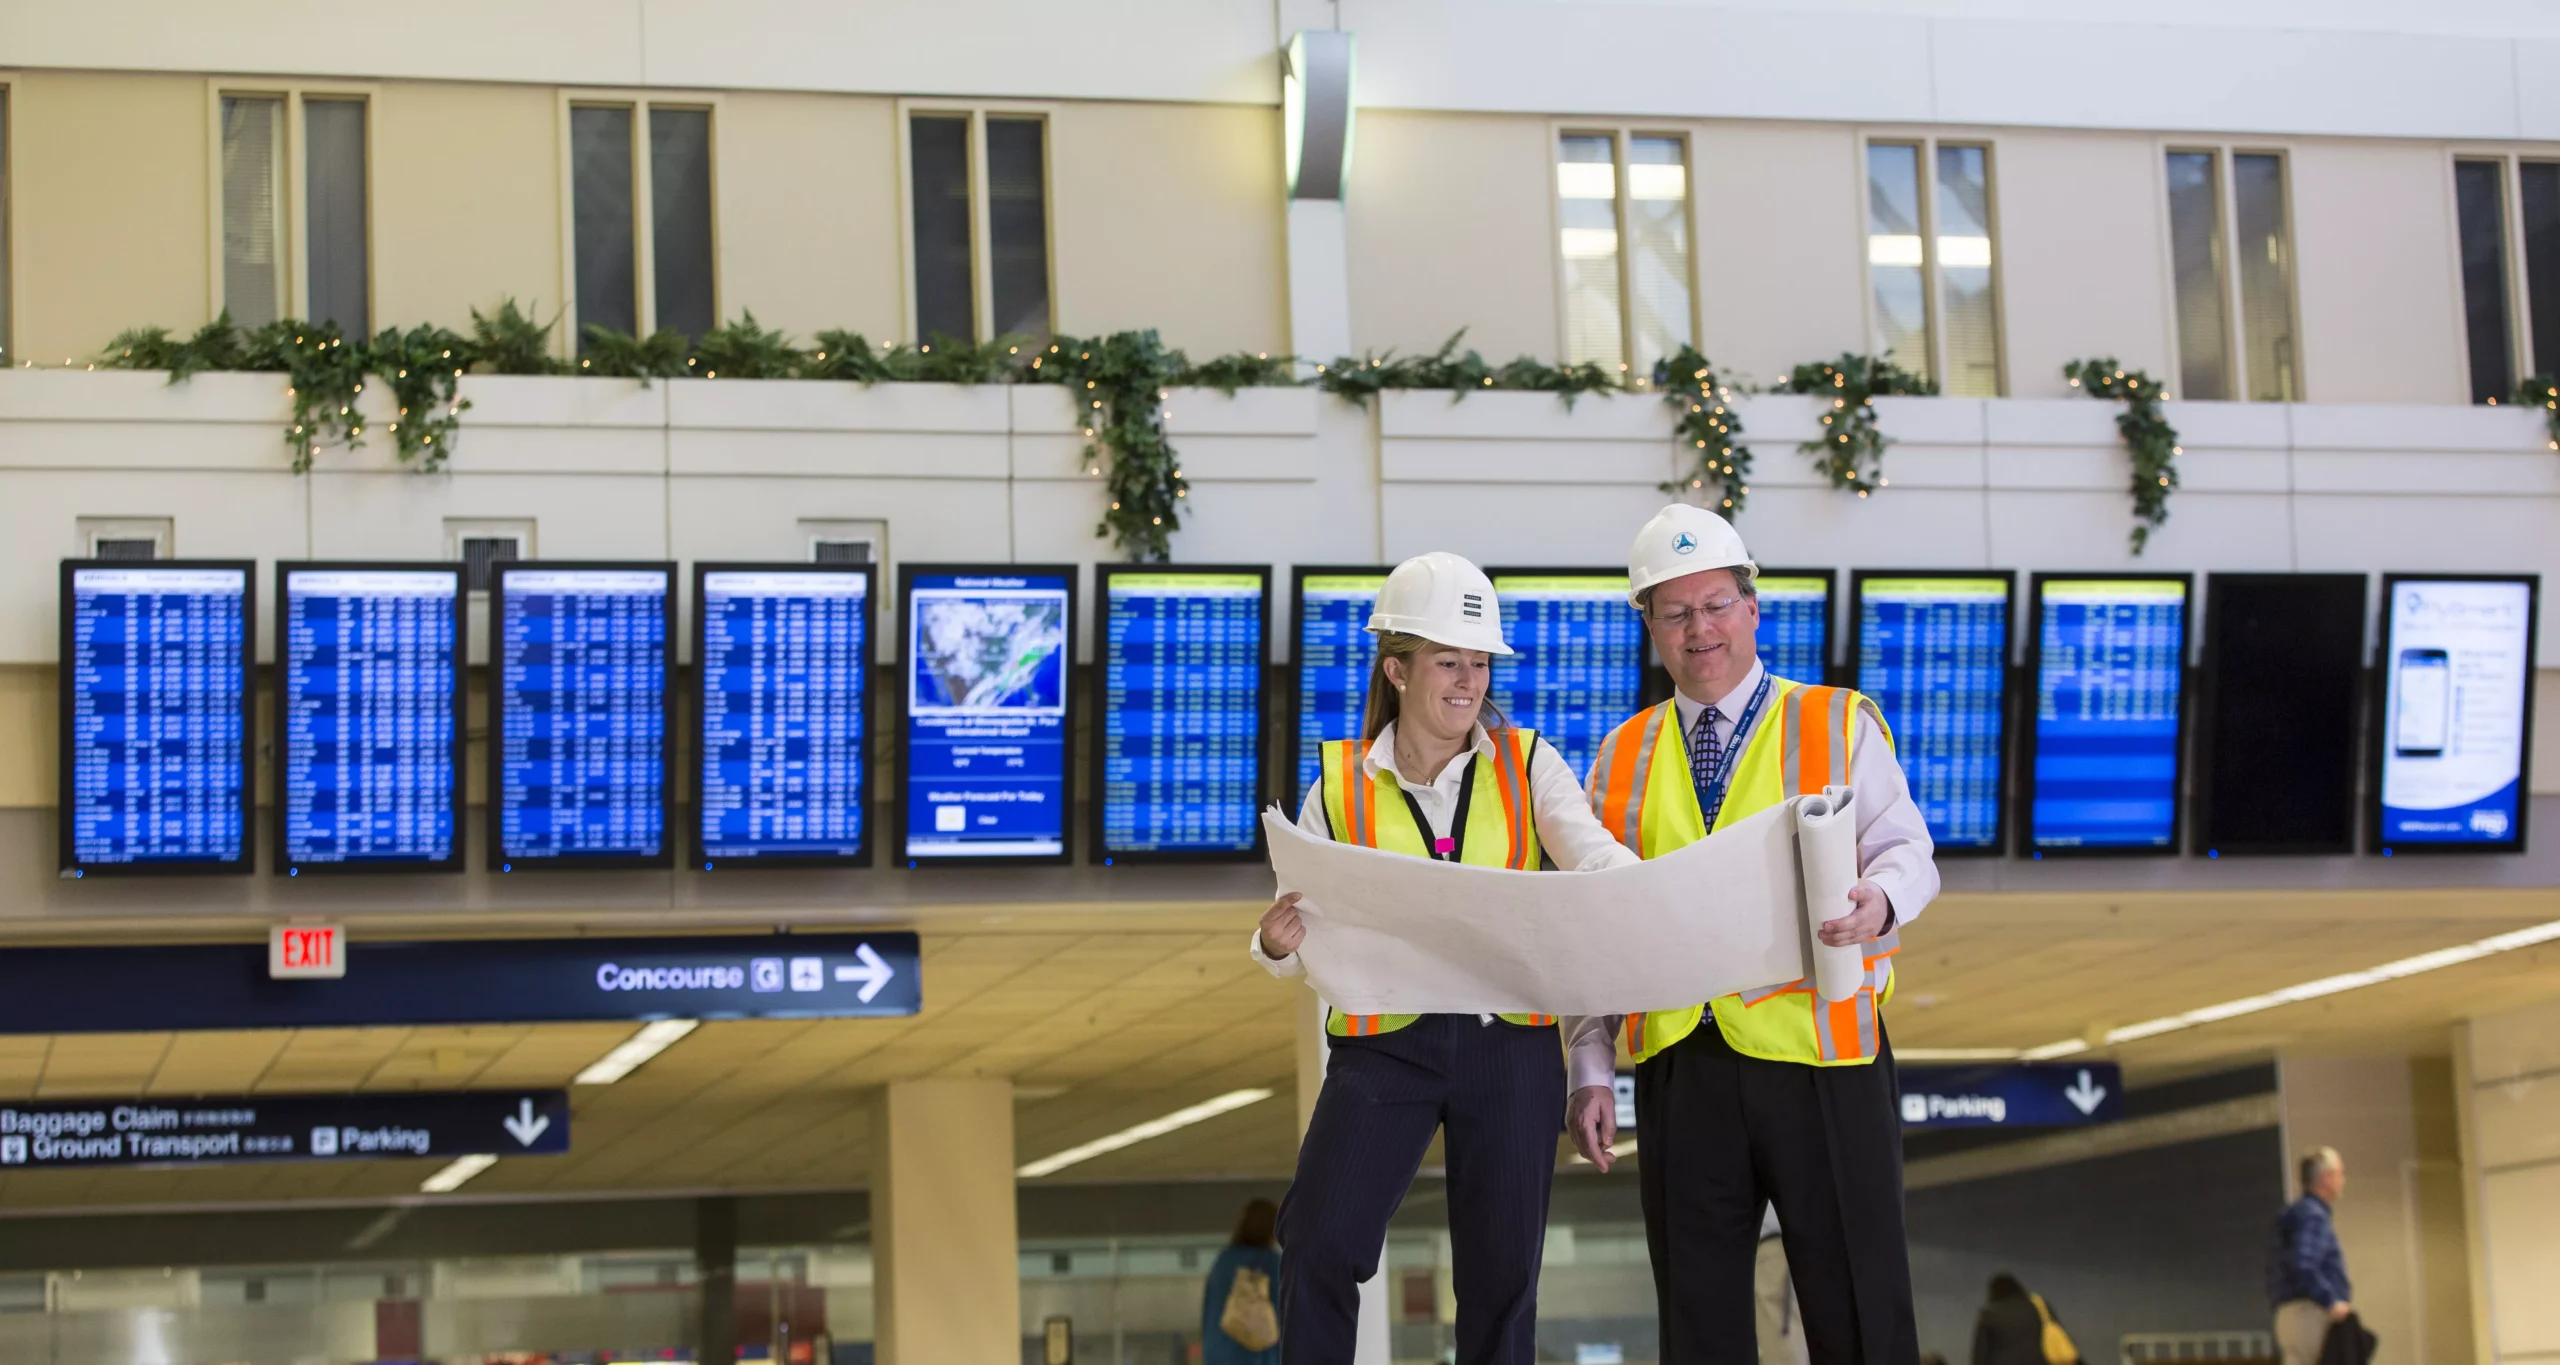 Two constructors on the airport